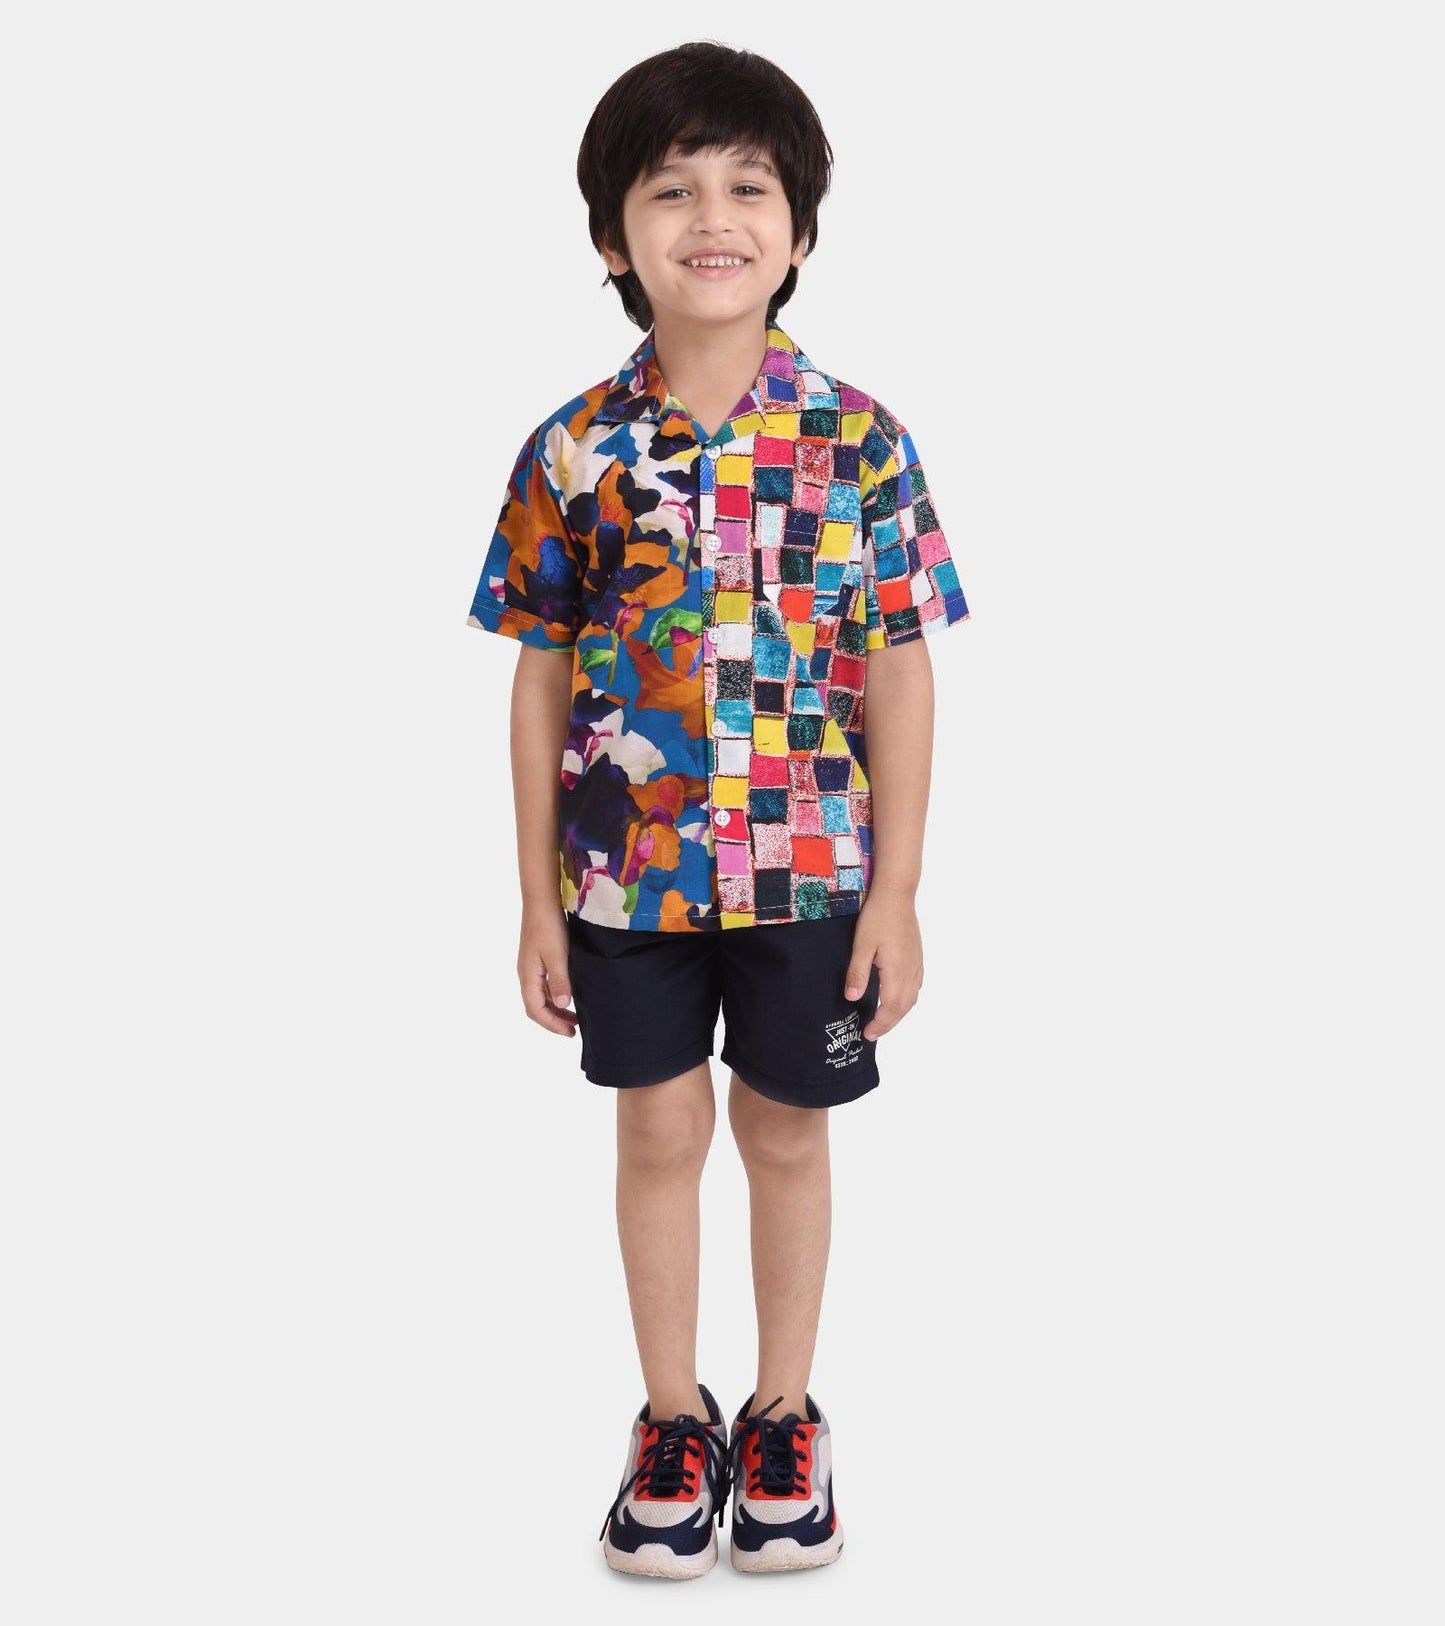 Double Trouble Printed Boys Shirt